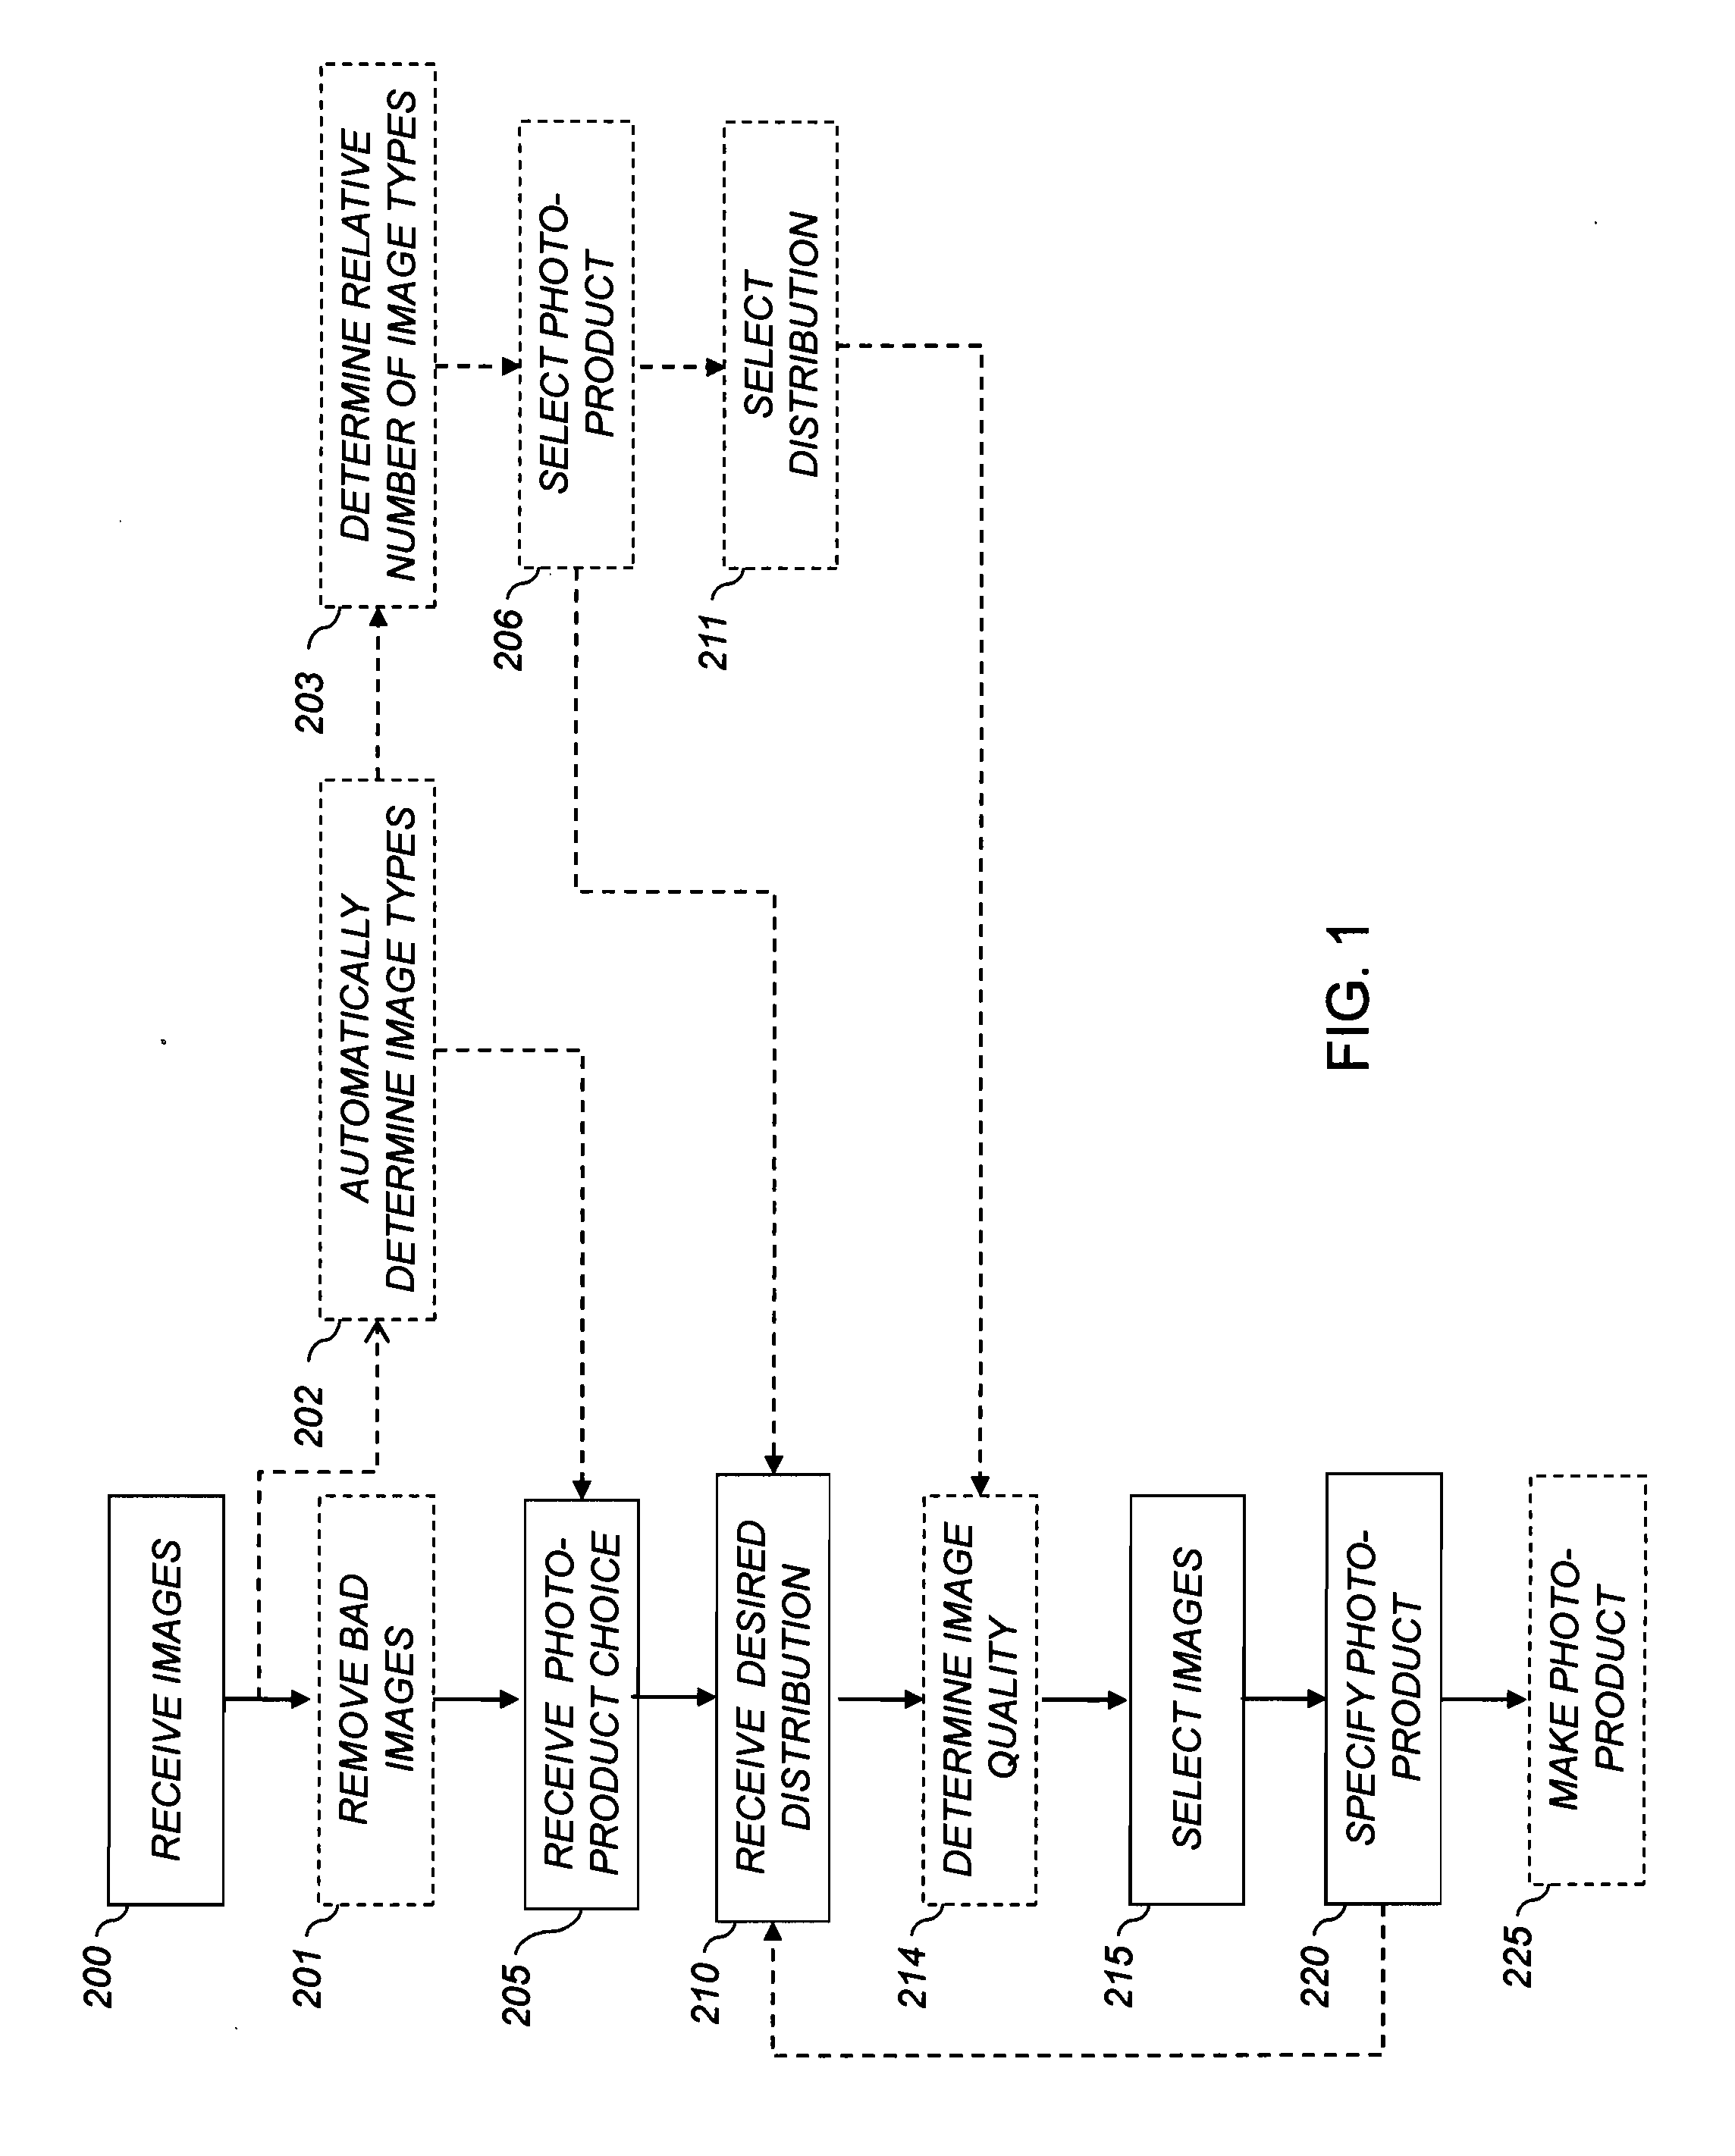 Automated photo-product specification method